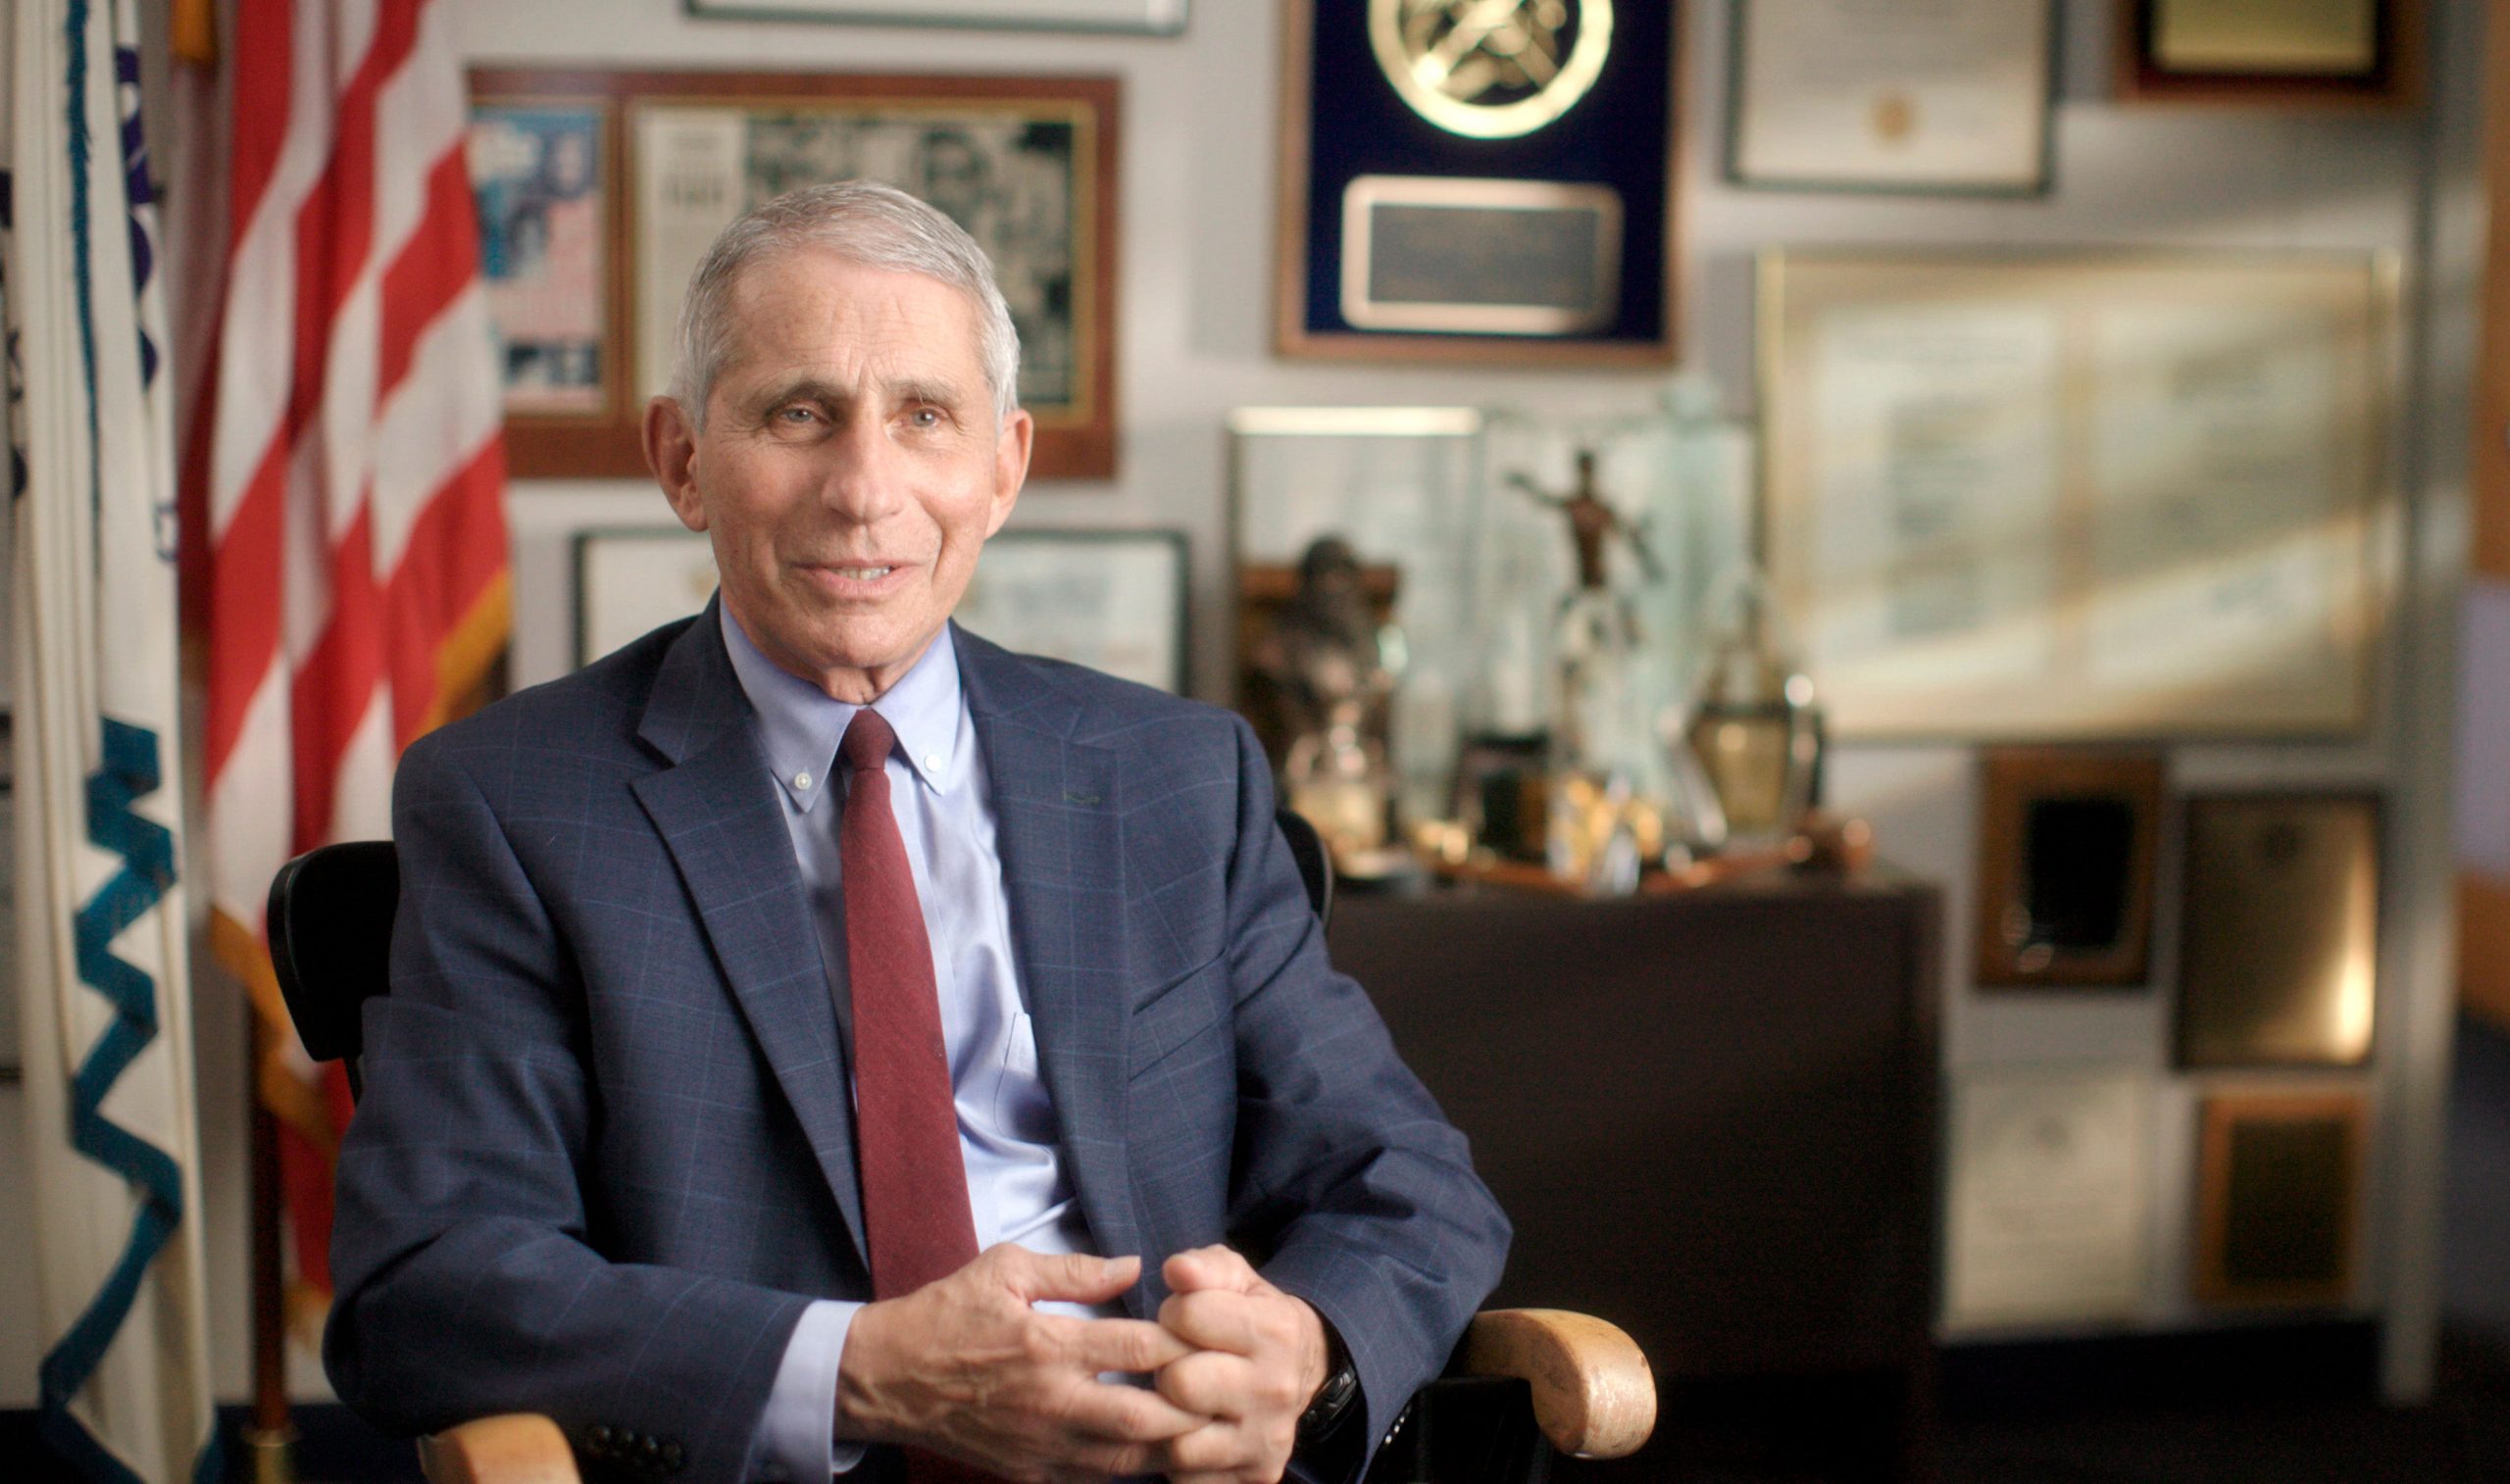 Top US virologist Anthony Fauci says trick or treat safe for vaccinated individuals